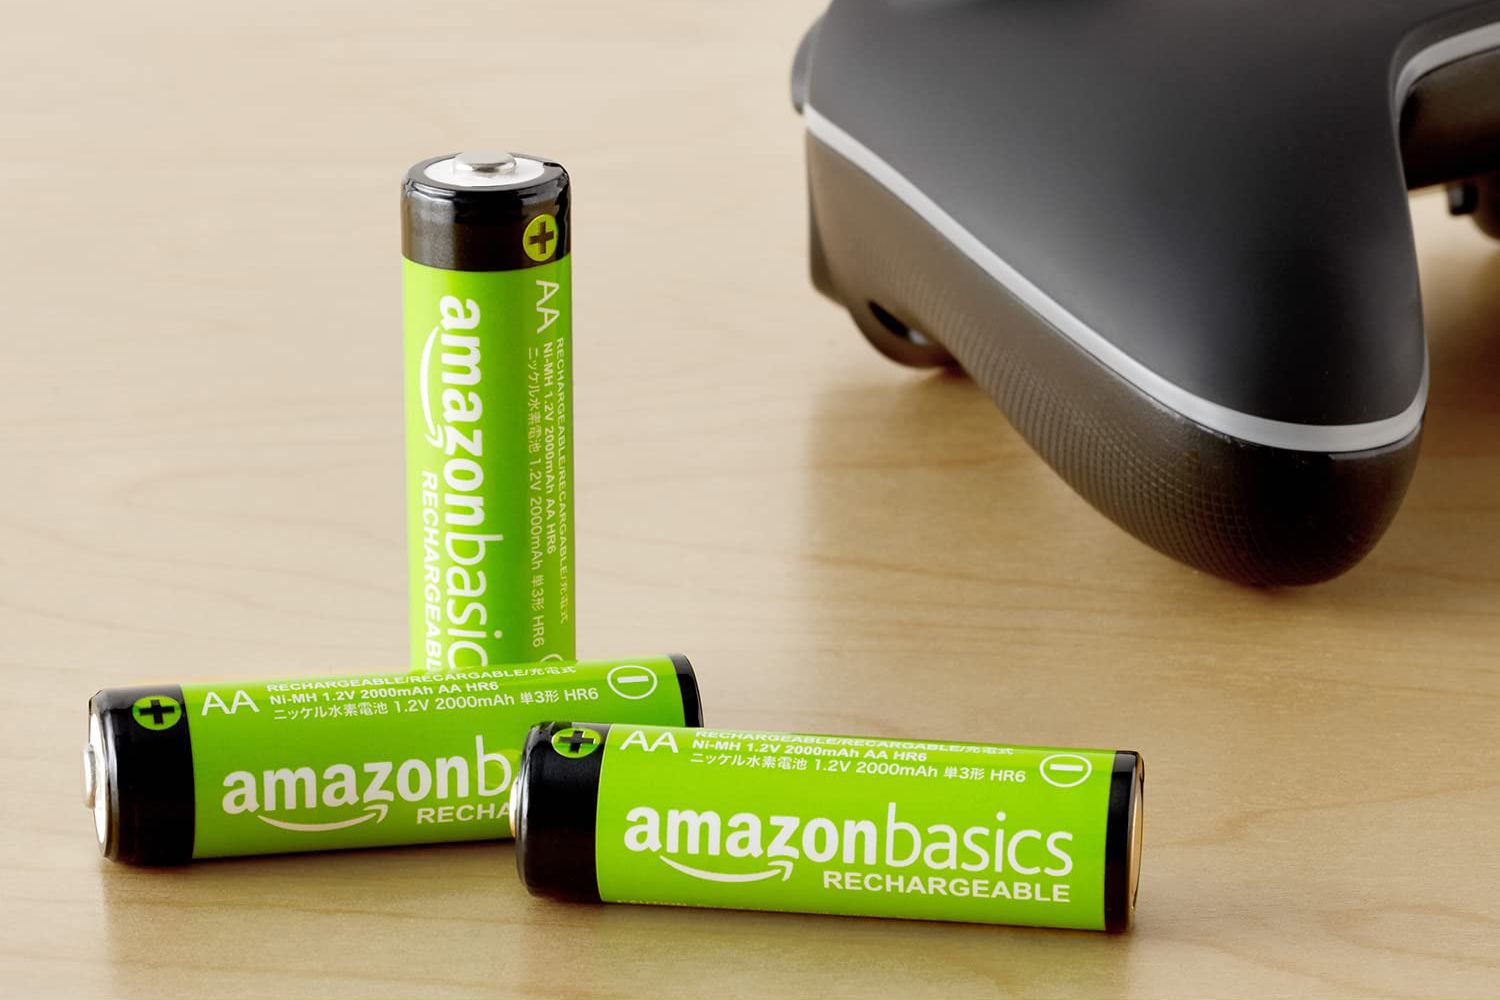 Three Amazon Basics rechargeable AA batteries pictured next to a gaming controller.